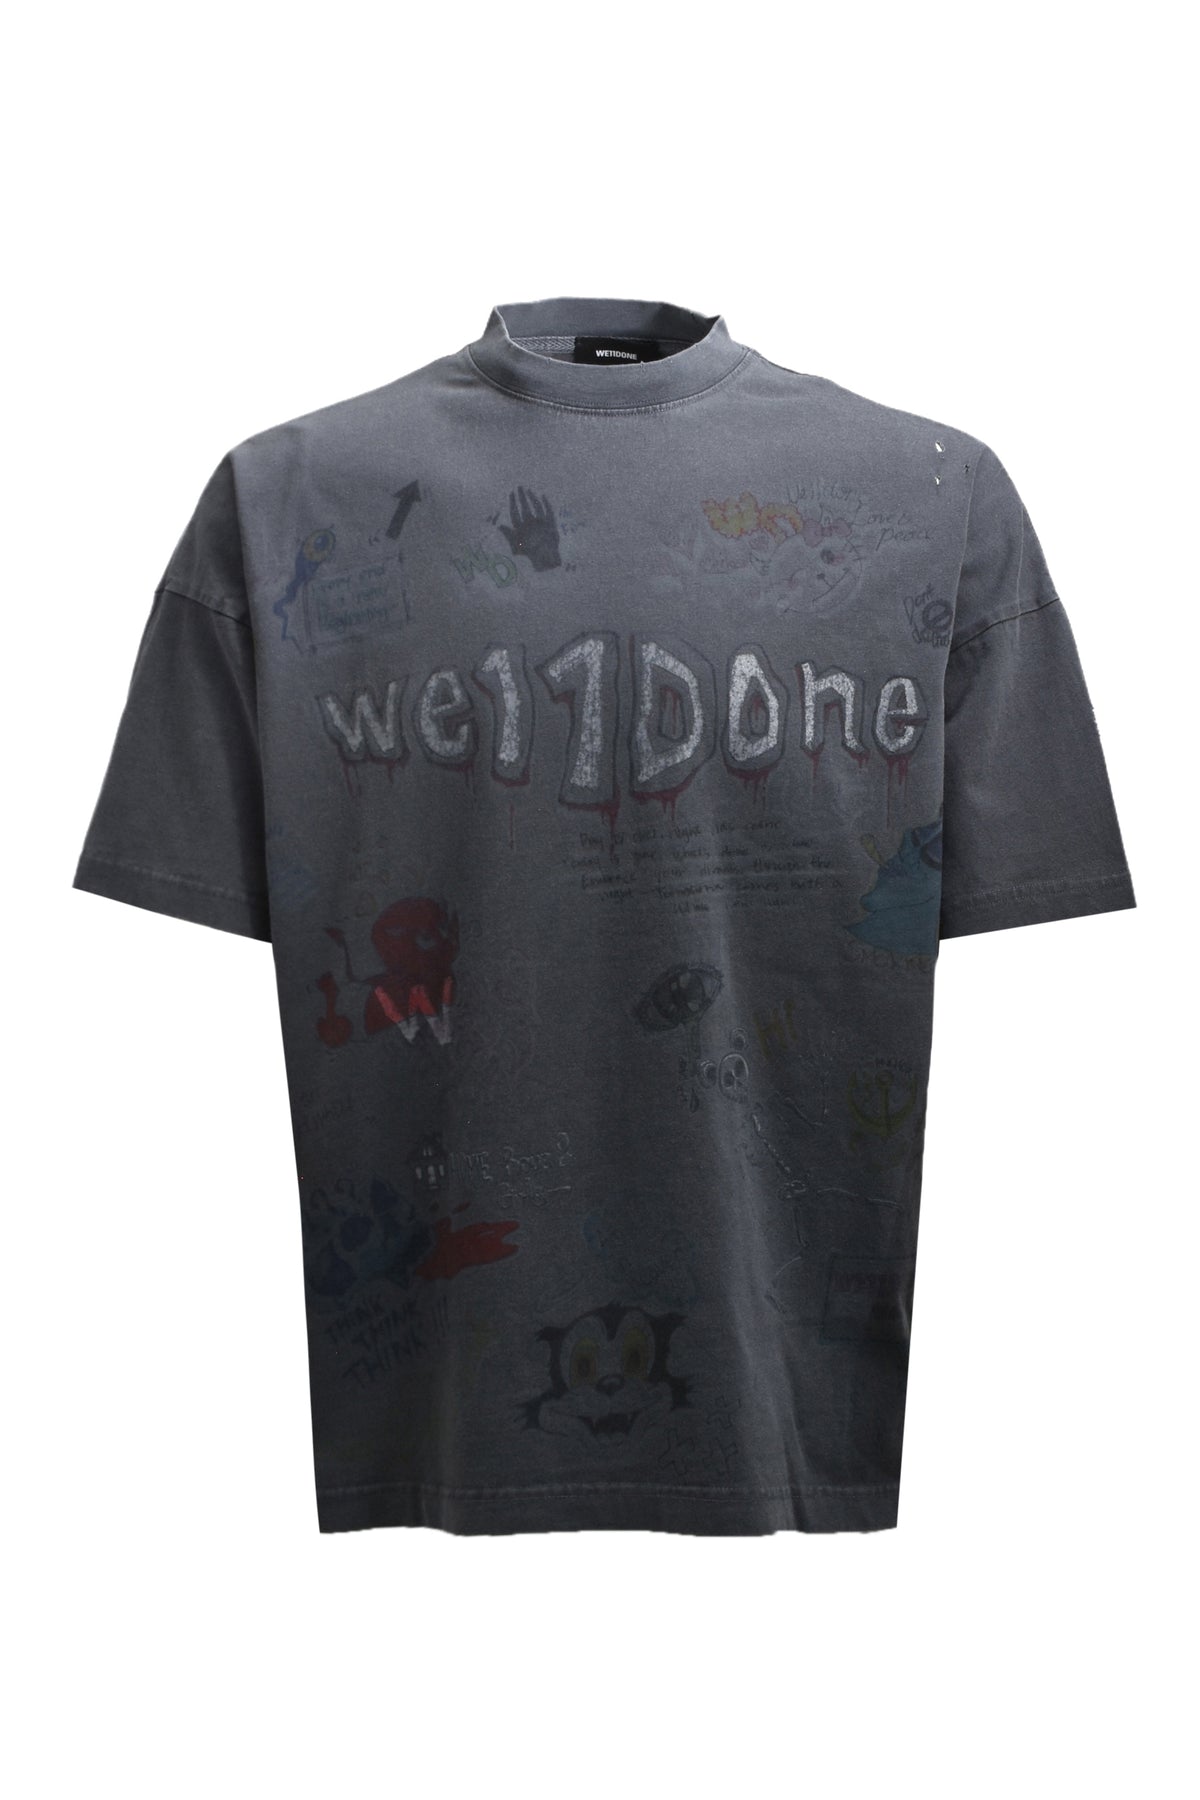 DOODLE SHORT-SLEEVED T-SHIRT / GRY